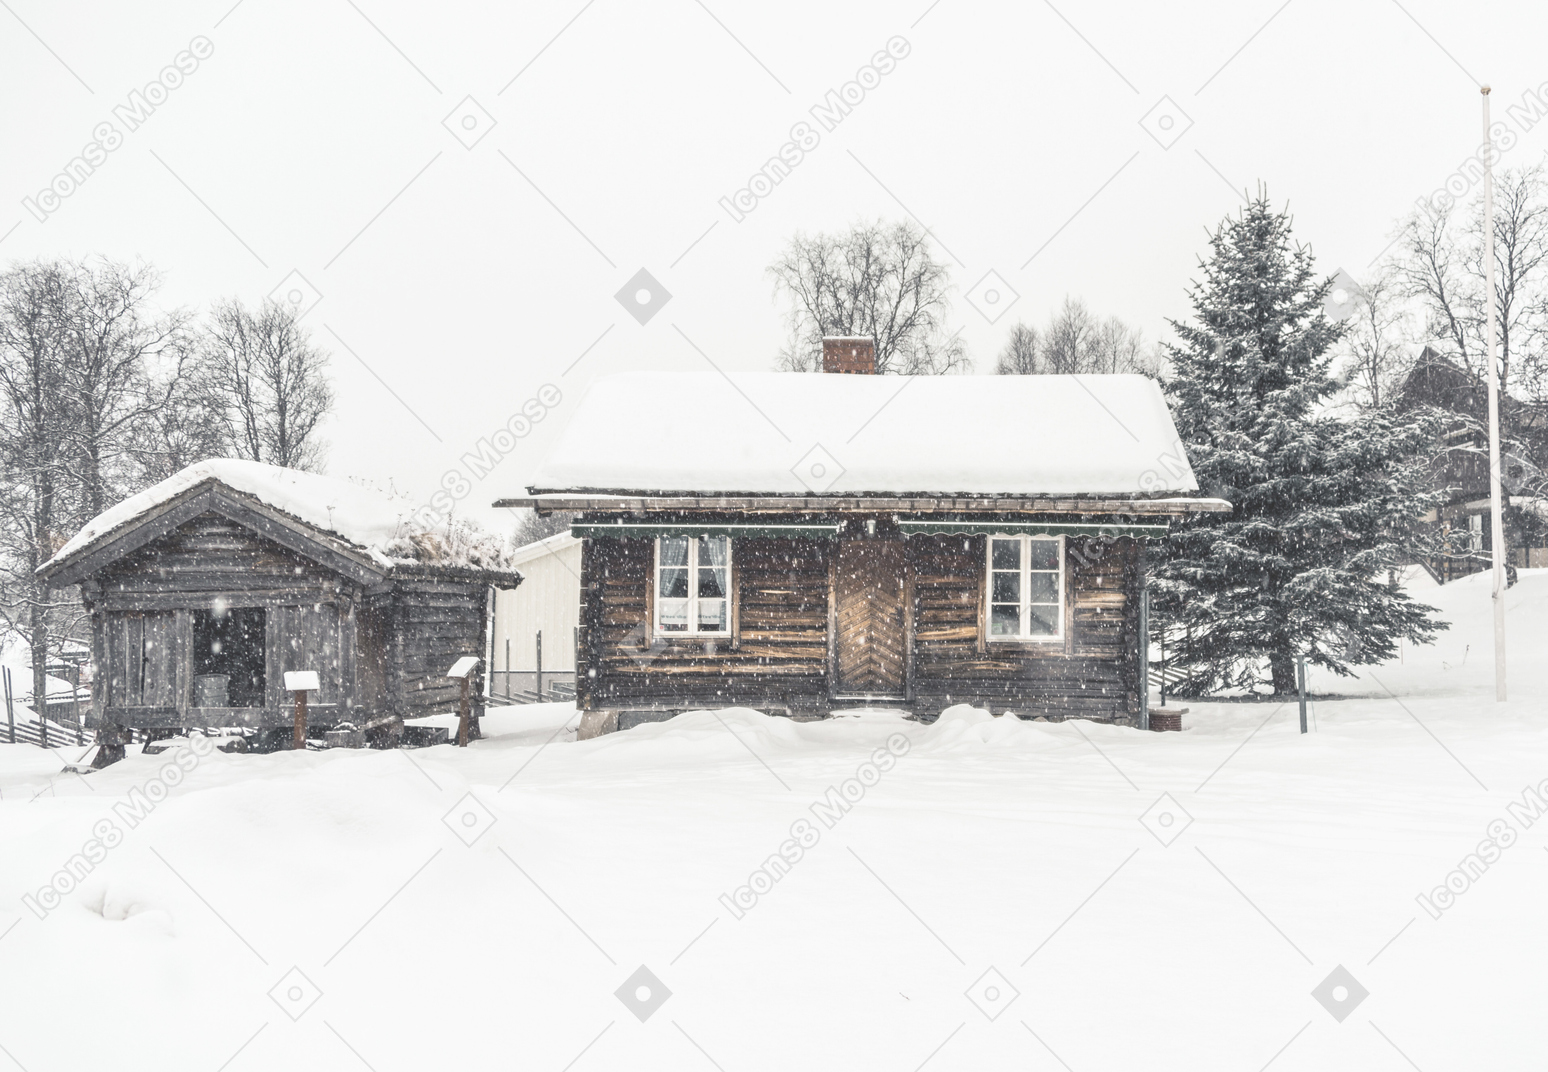 Cottage in the winter